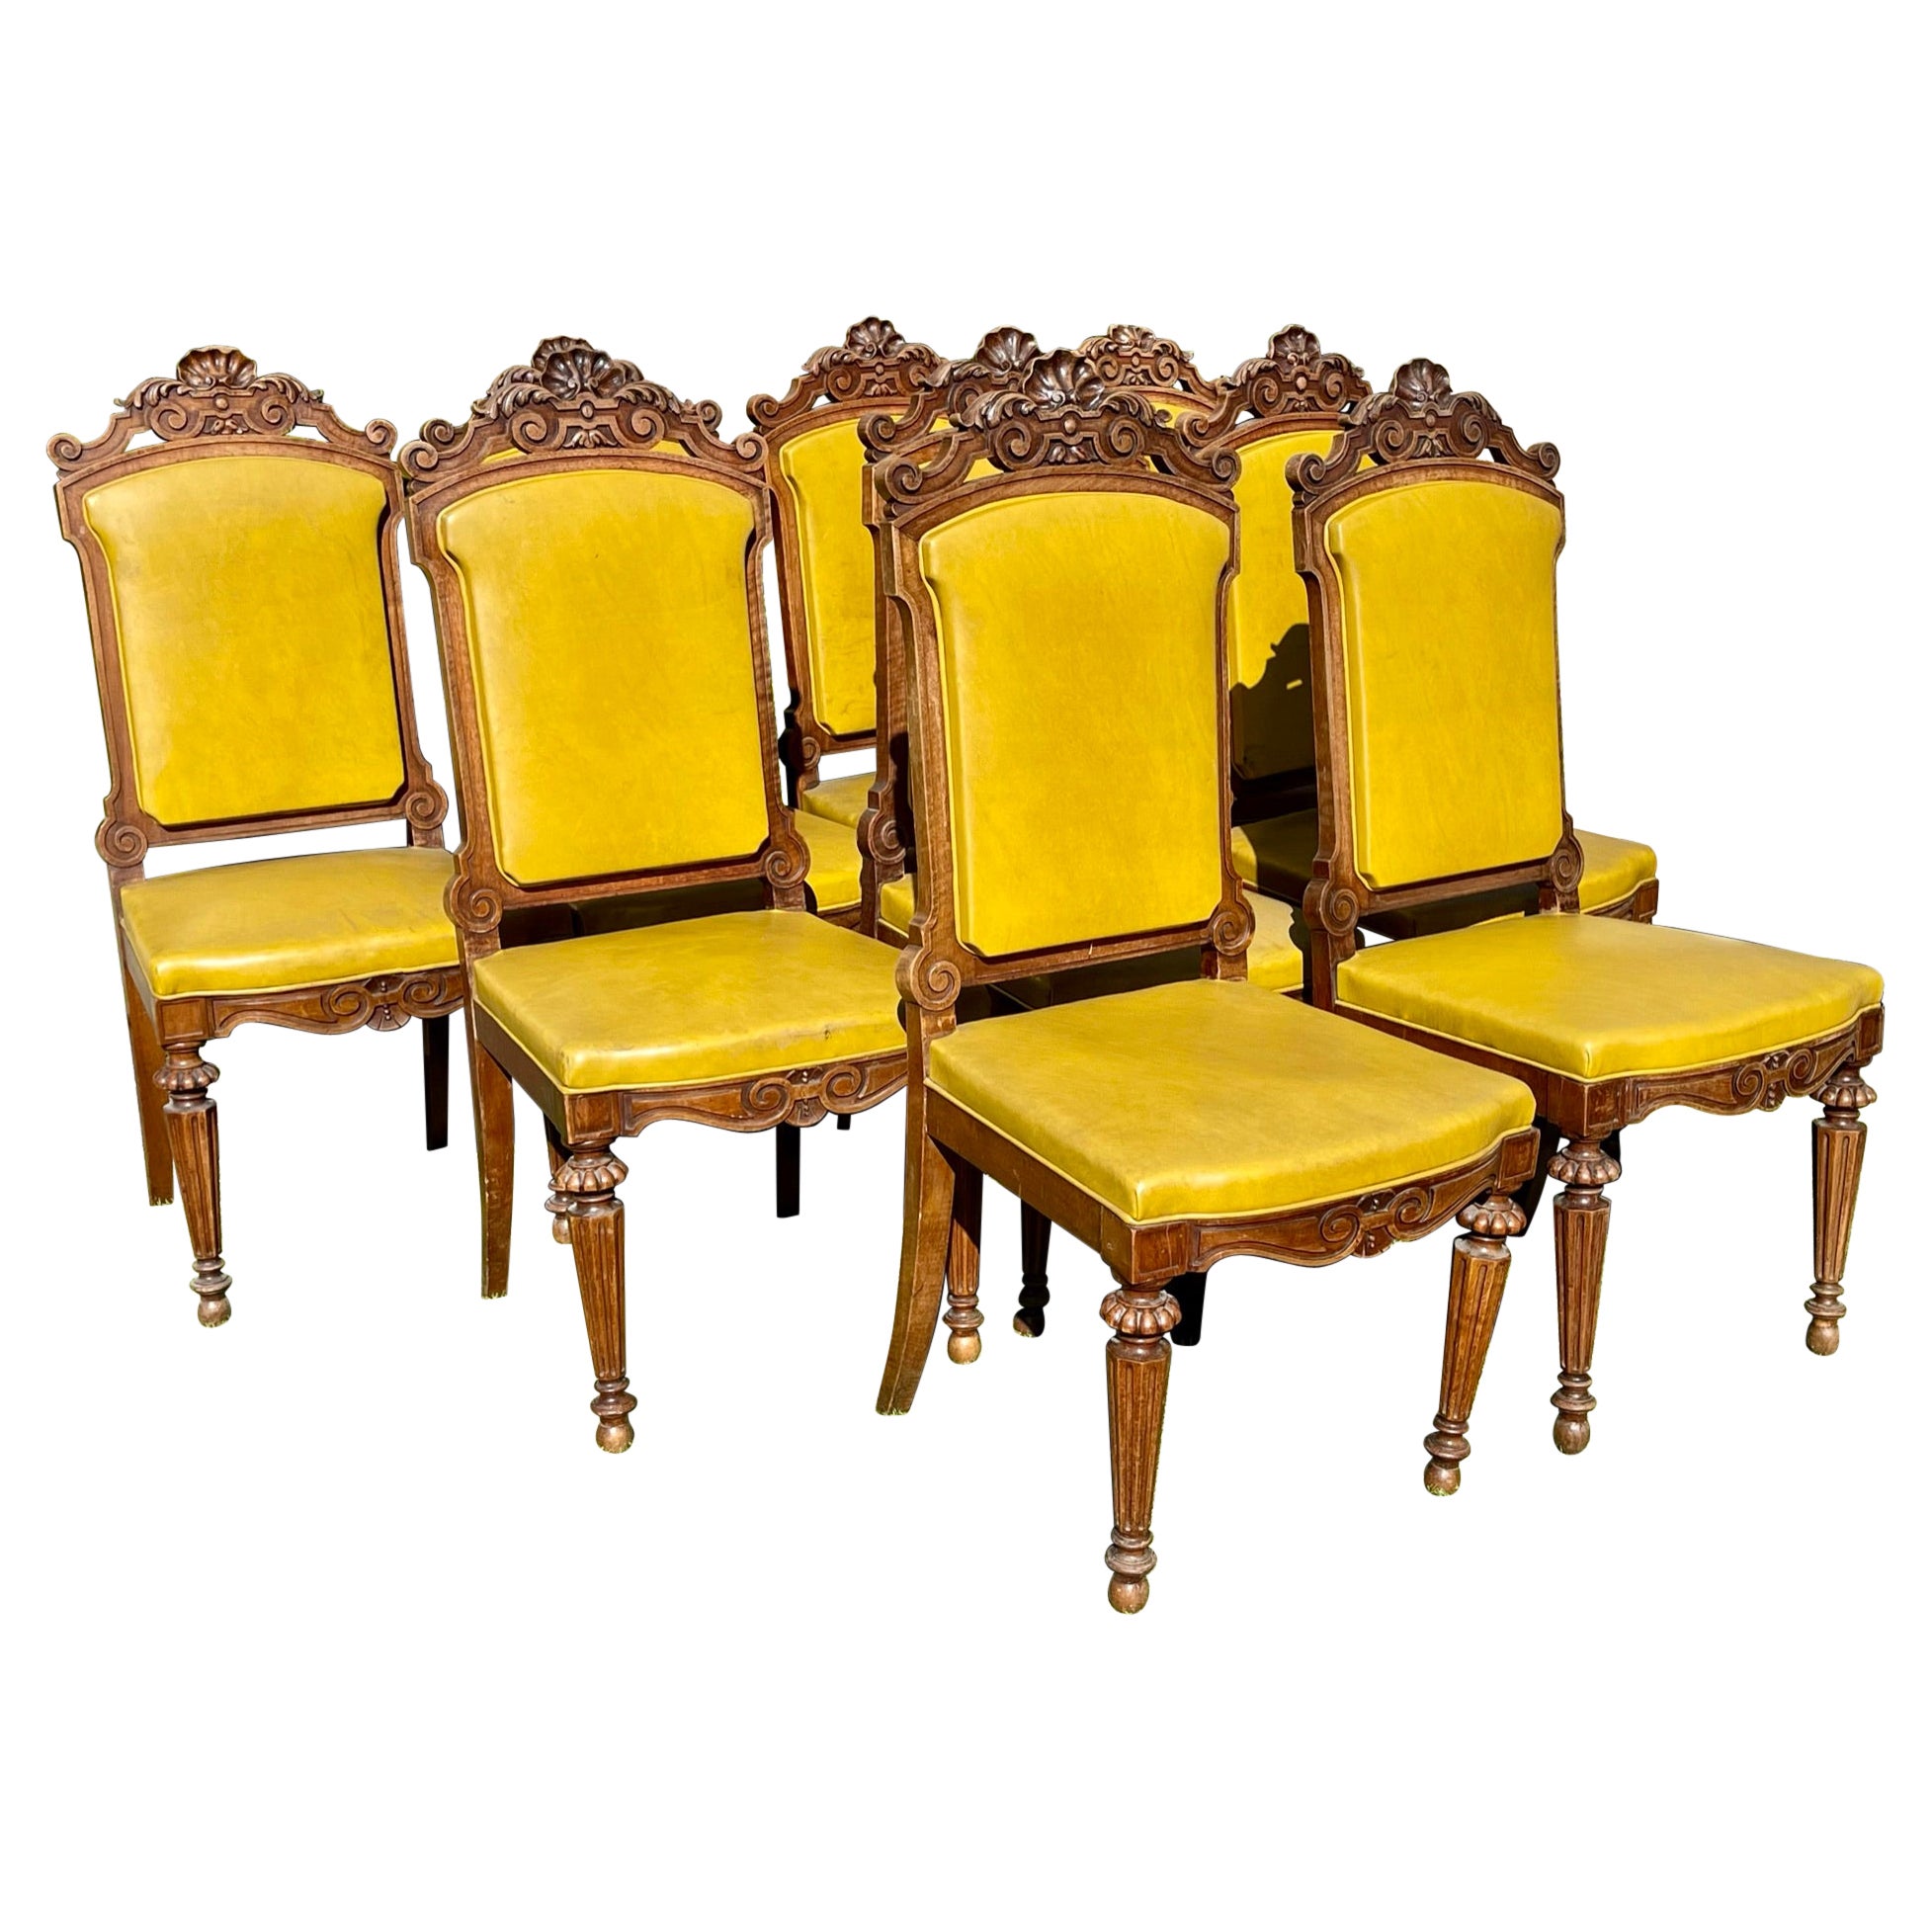 Suit of 9 Walnut Chairs Period Napoleon III, 19th Century For Sale